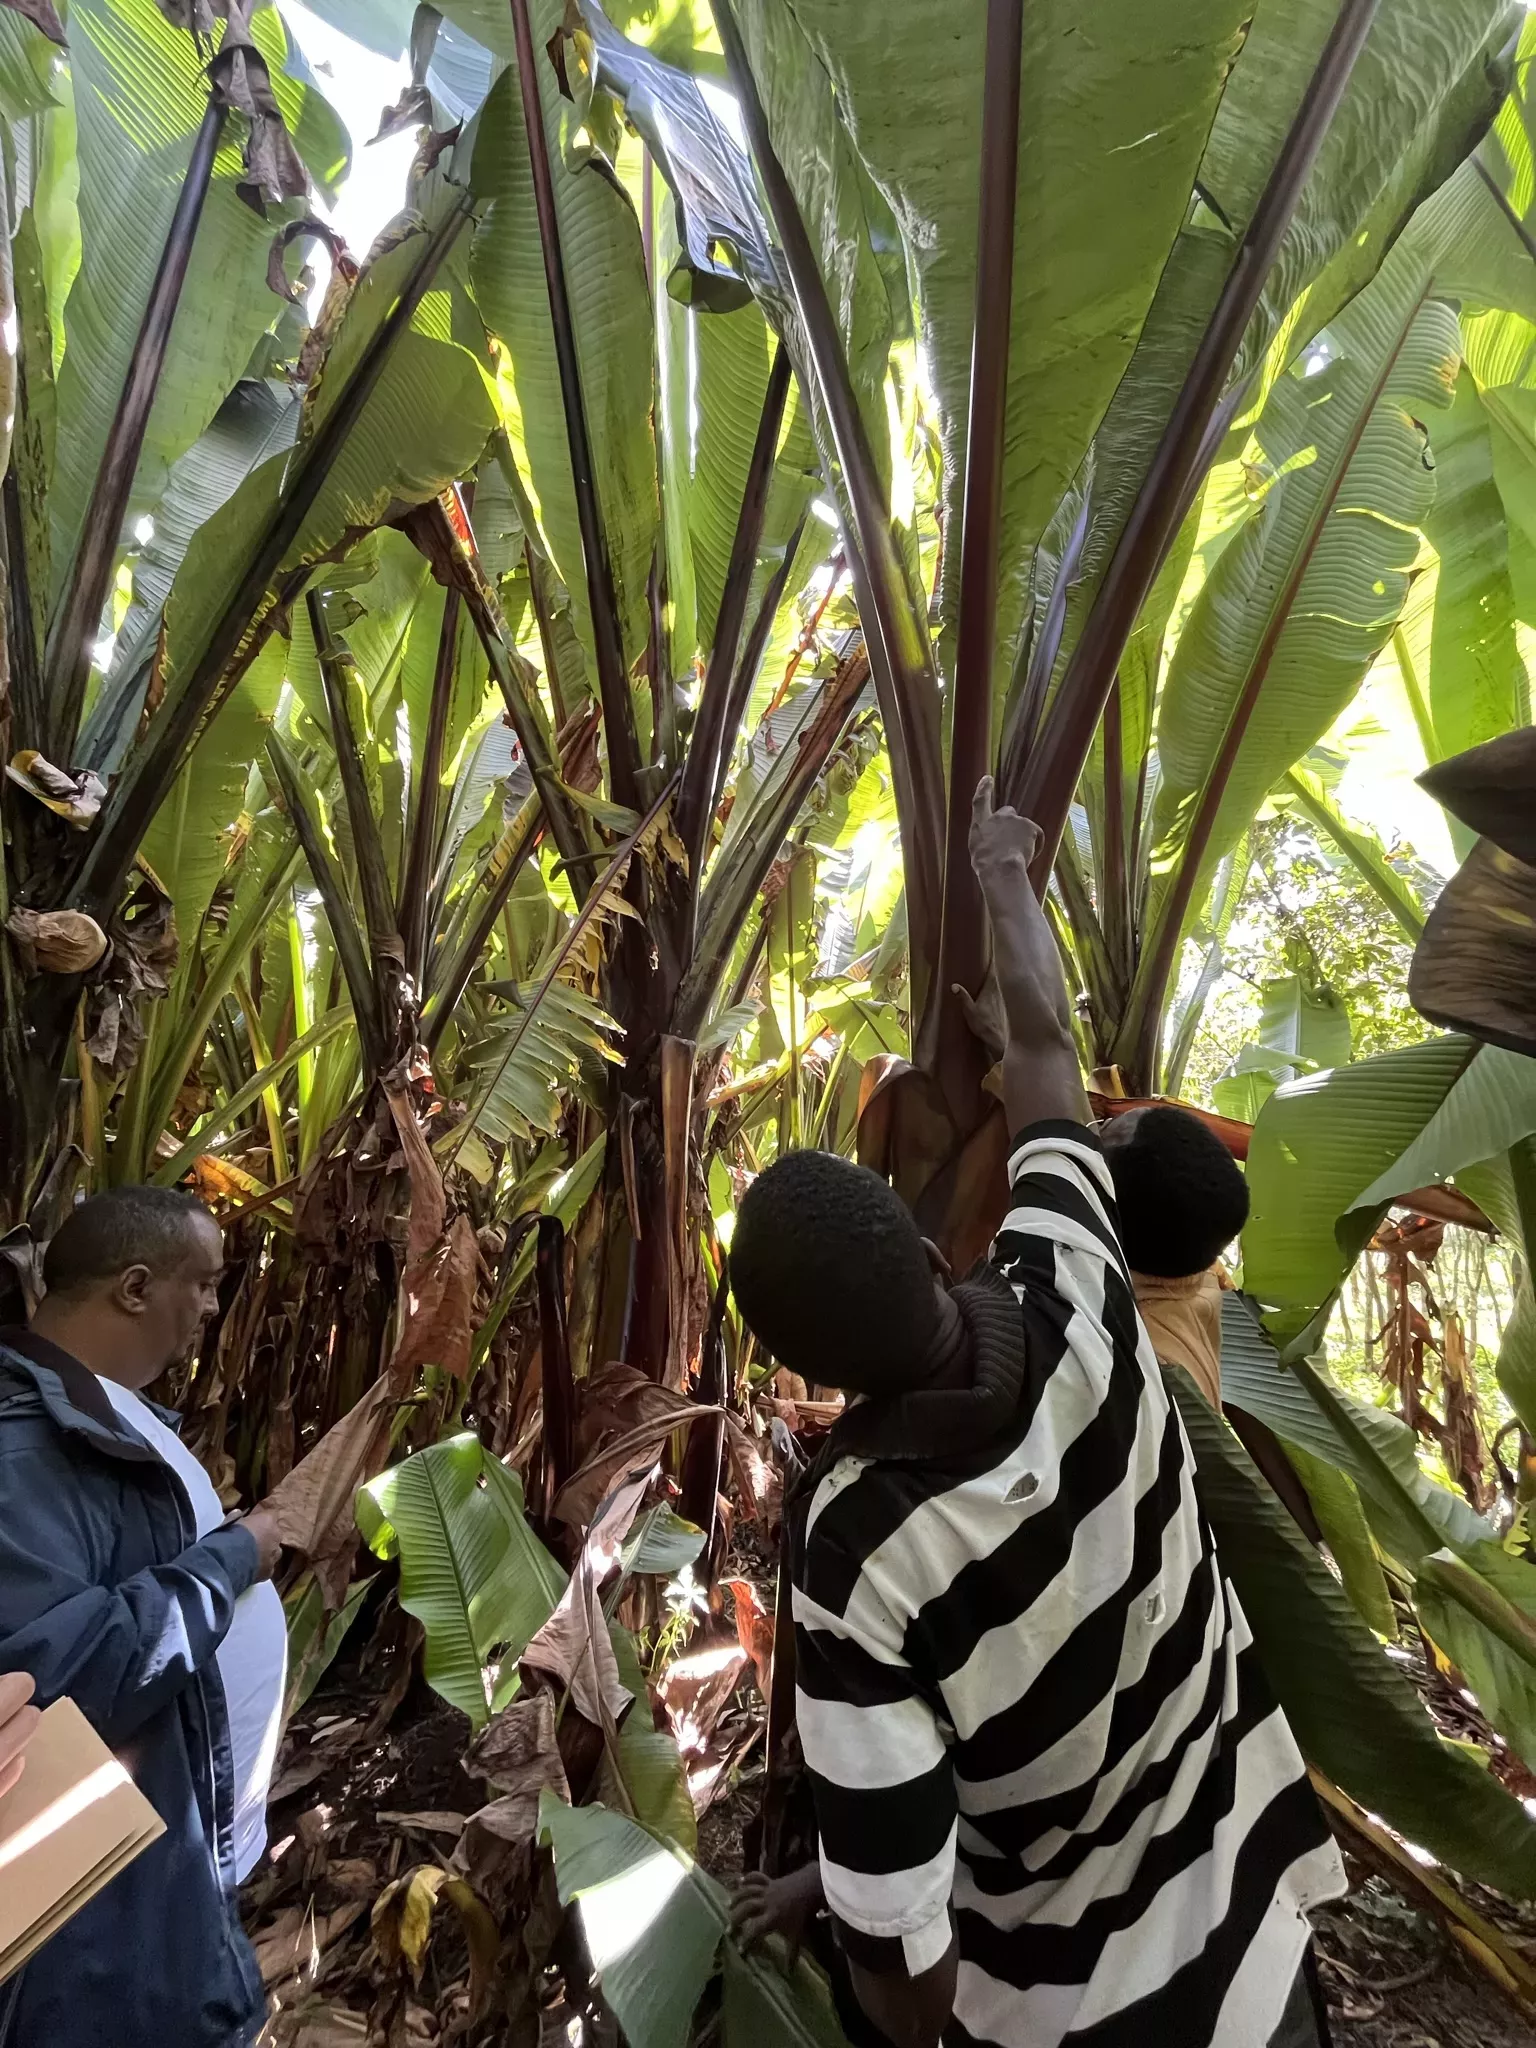 Farmers examine an enormous plant from its base, they are dwarfed by massive leaves, each as tall as a human